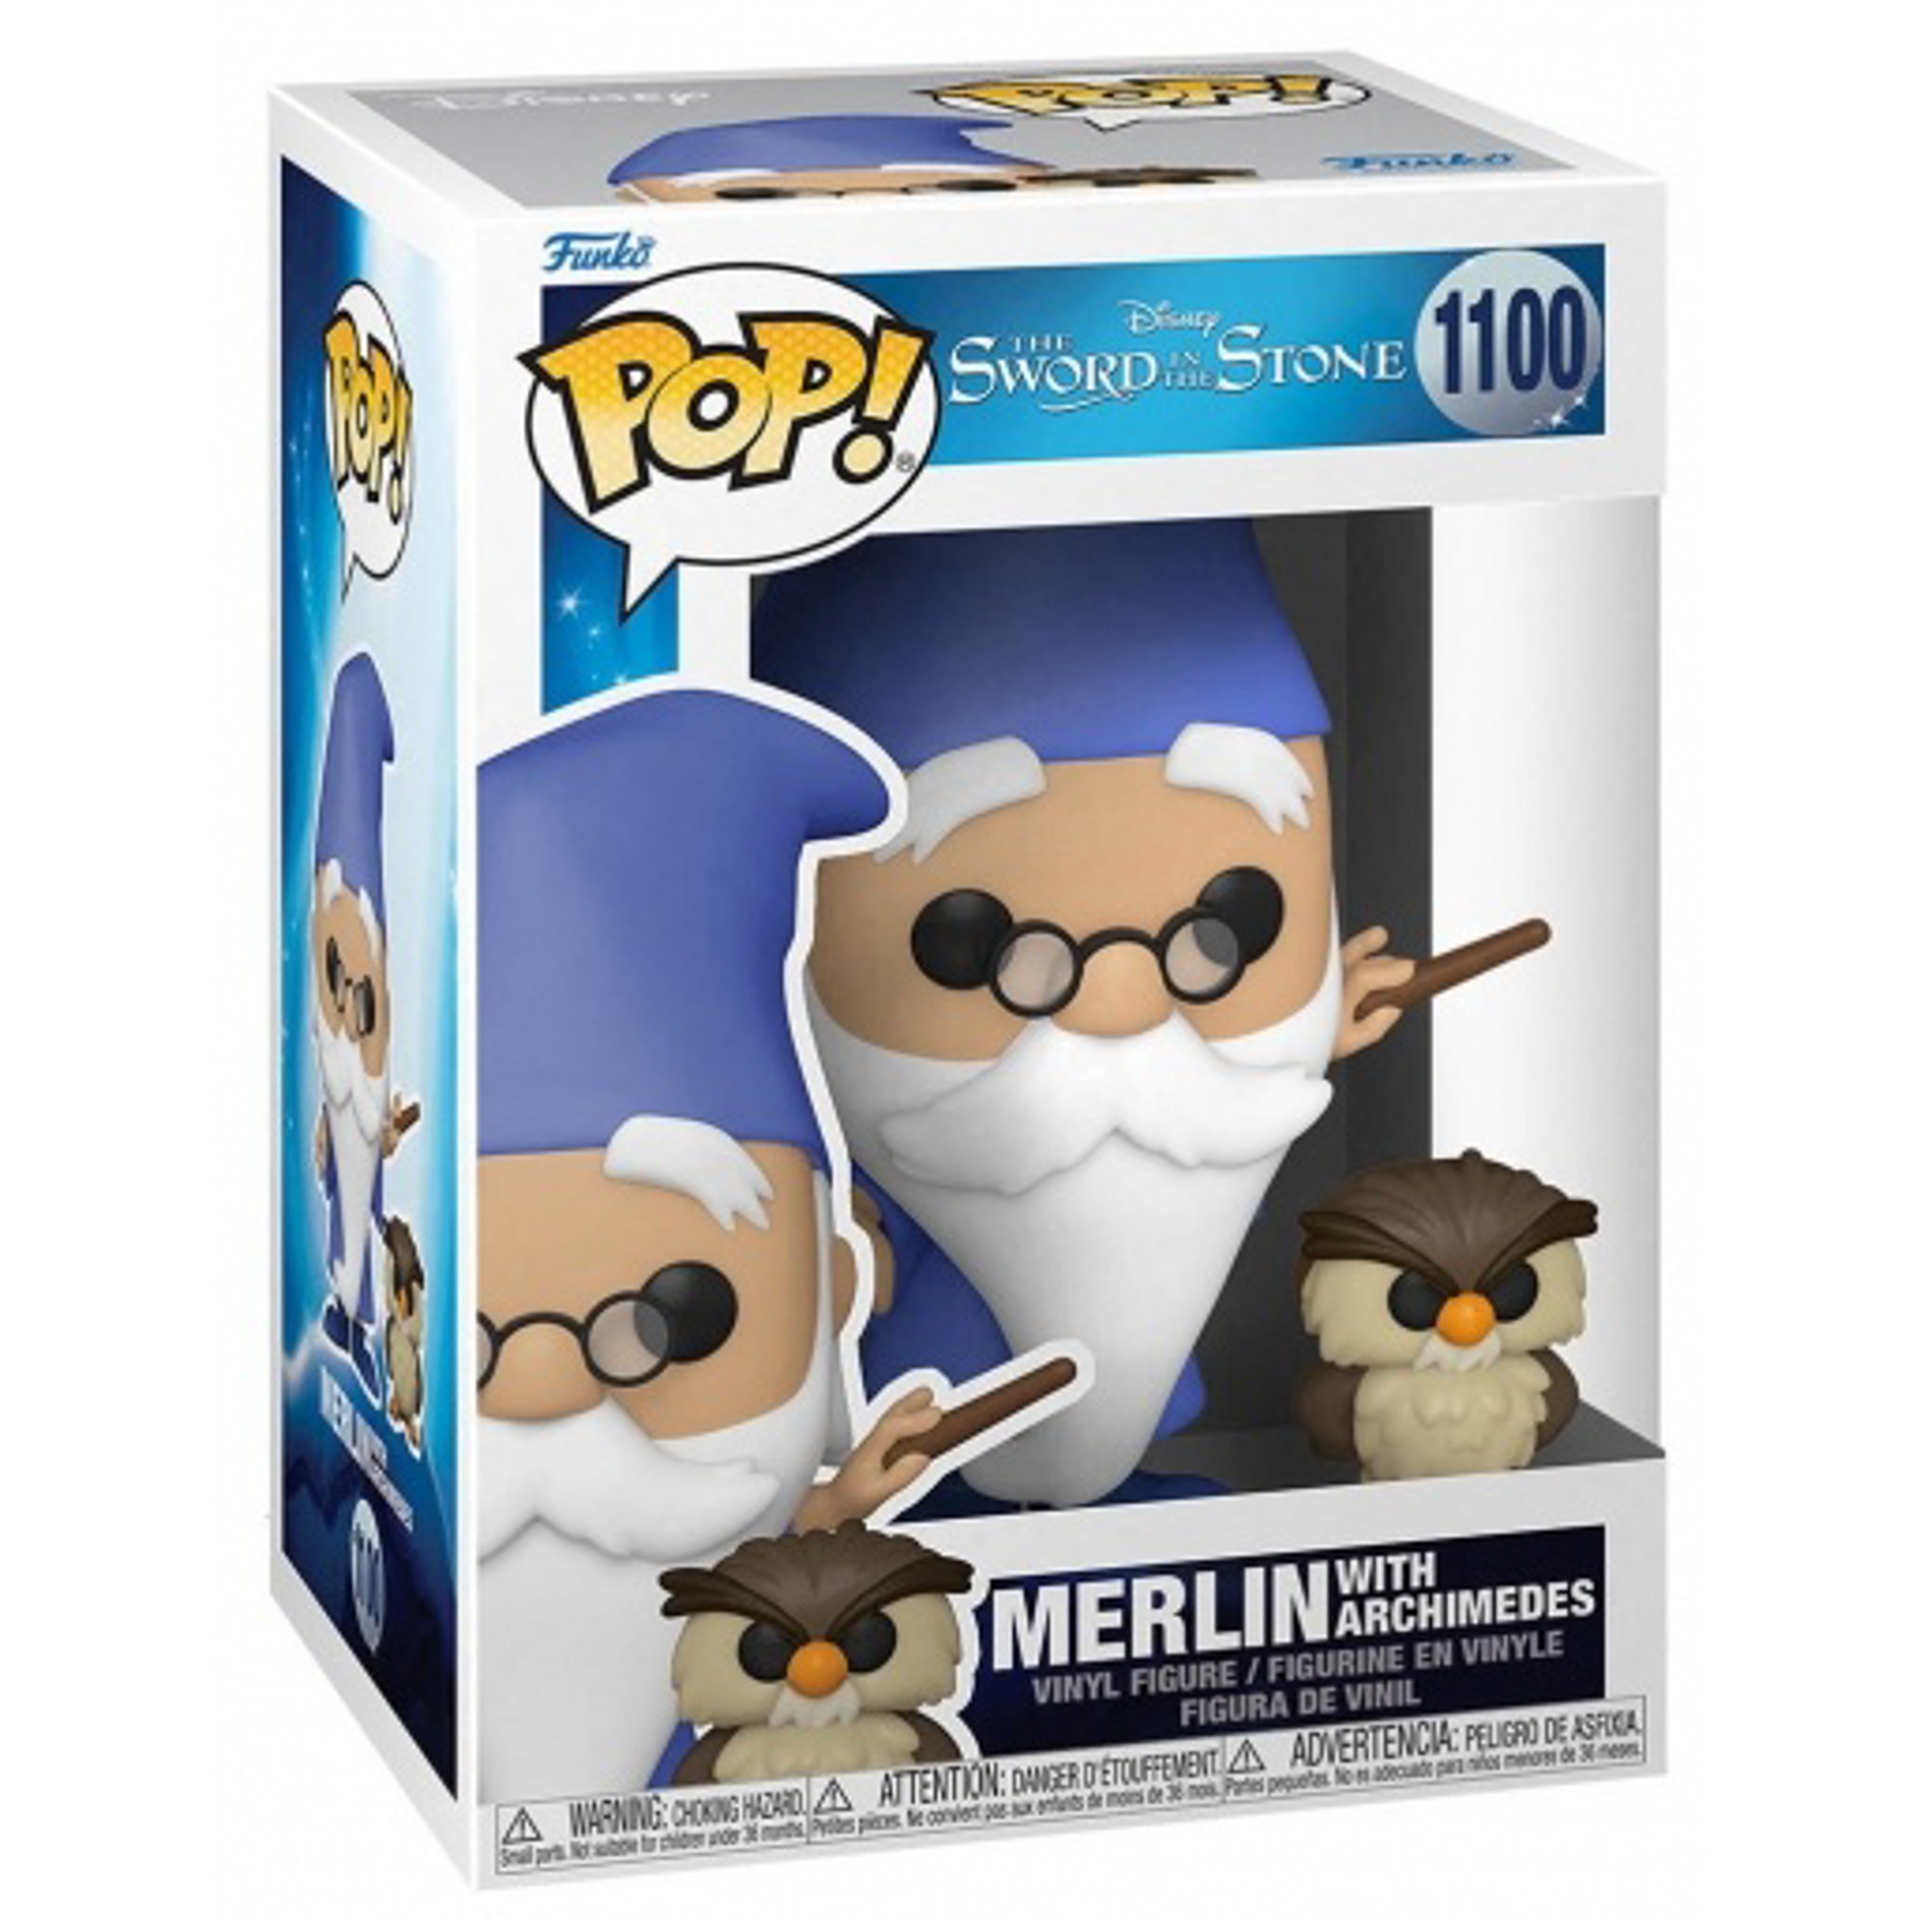 Funko Pop! Disney: The Sword in the Stone - Merlin with Archimedes ENG Merchandising